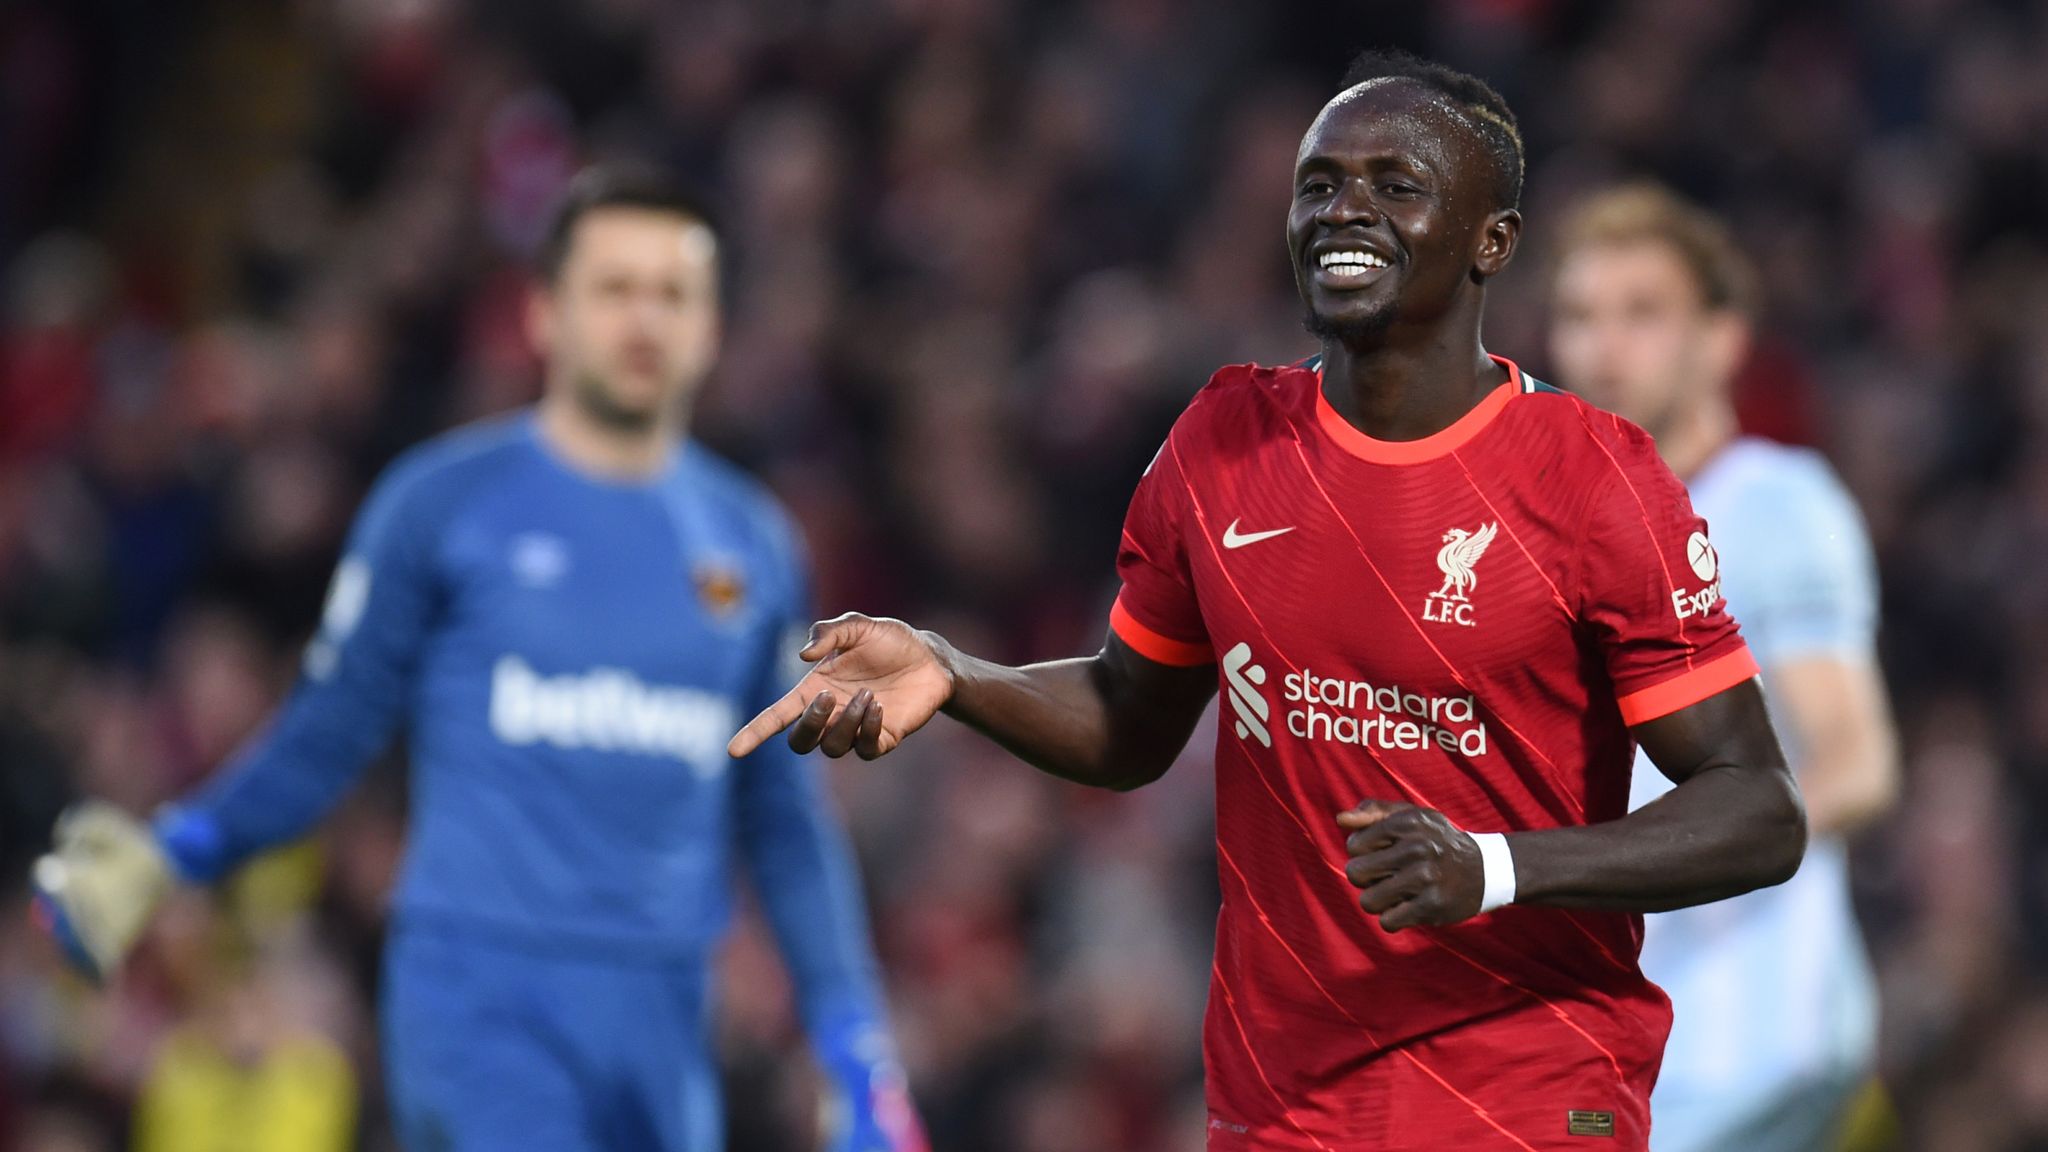 Sadio Mane desperate to join Bayern Munich from Liverpool in the summer transfer window